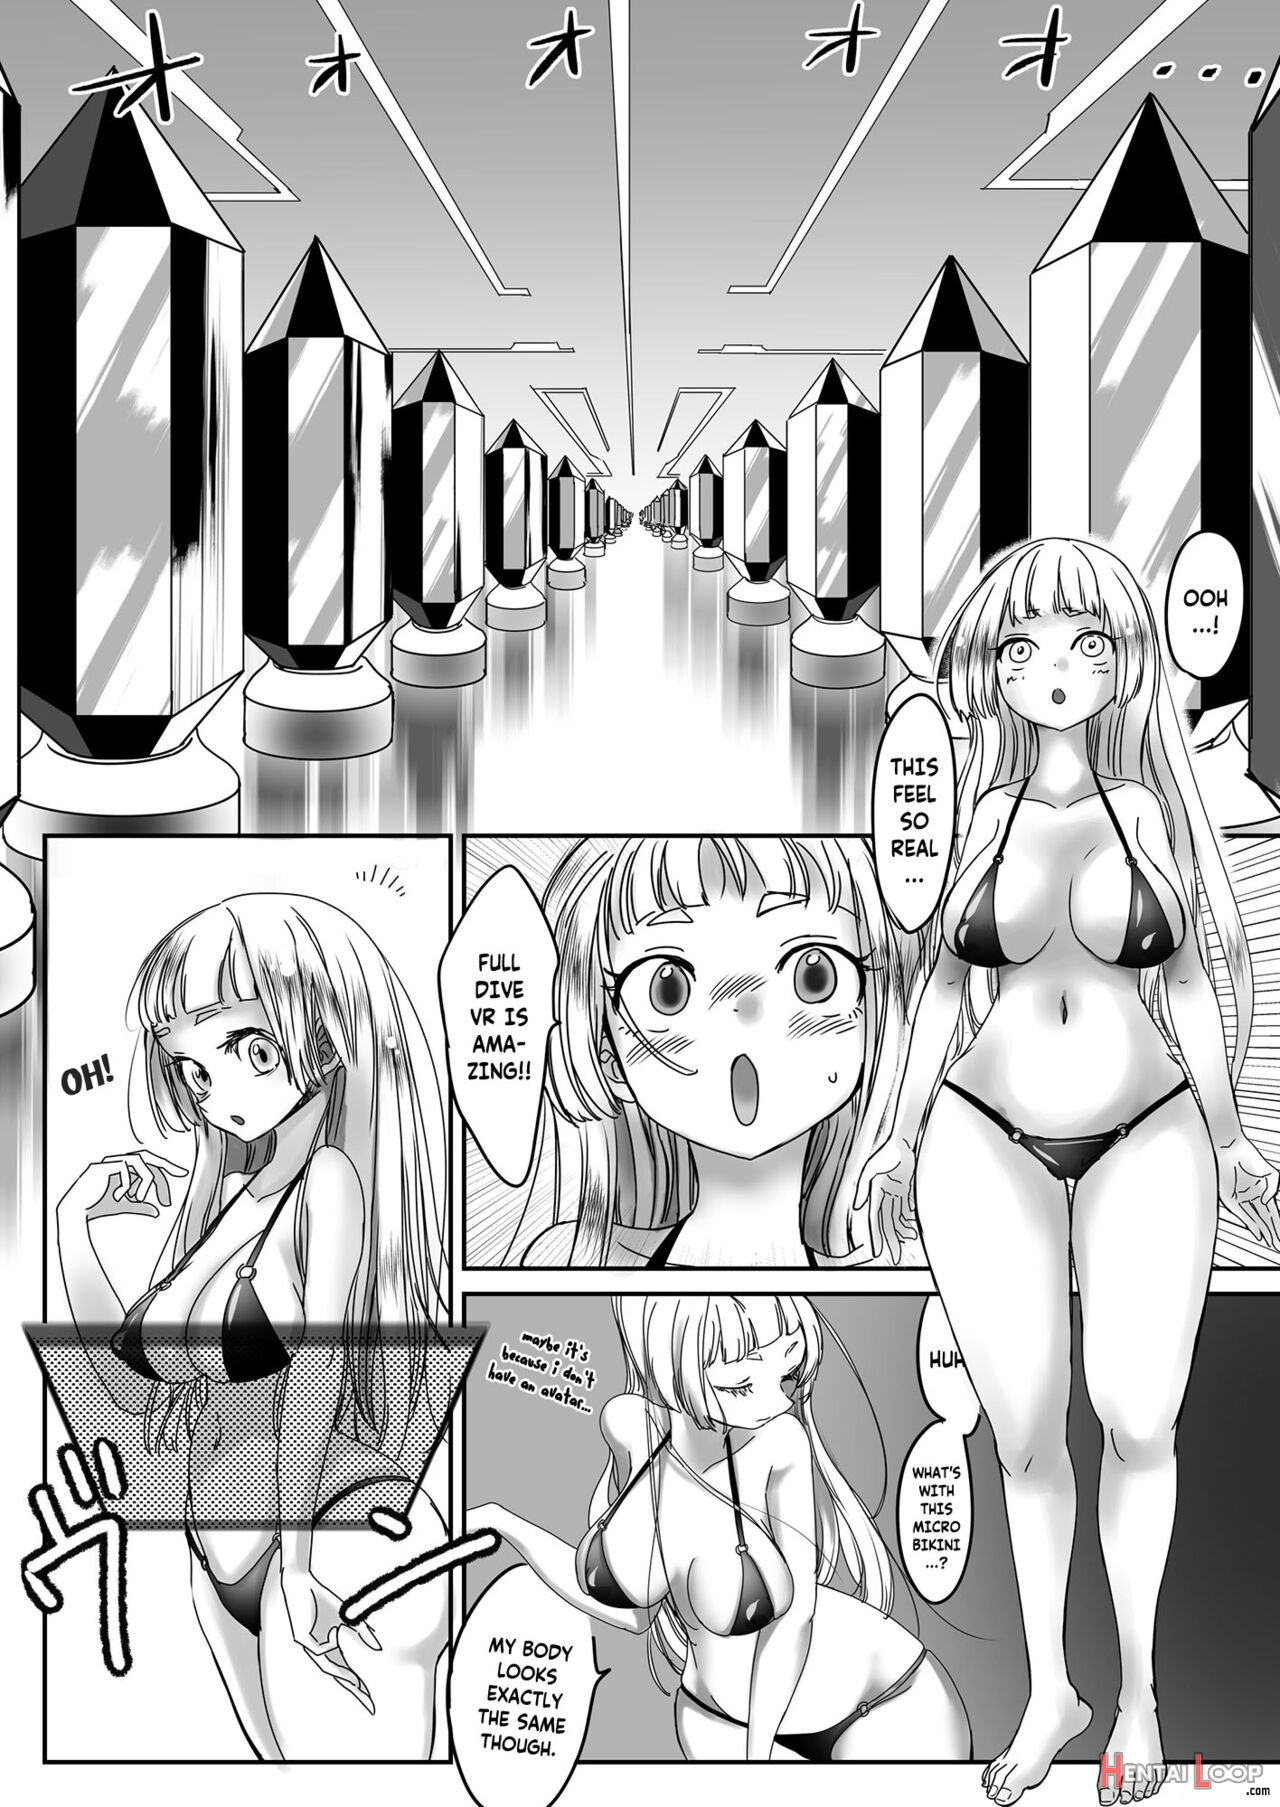 That Room Of Reminiscence In Eroge Where You Can't Get Out Until You See Everything To The End page 3